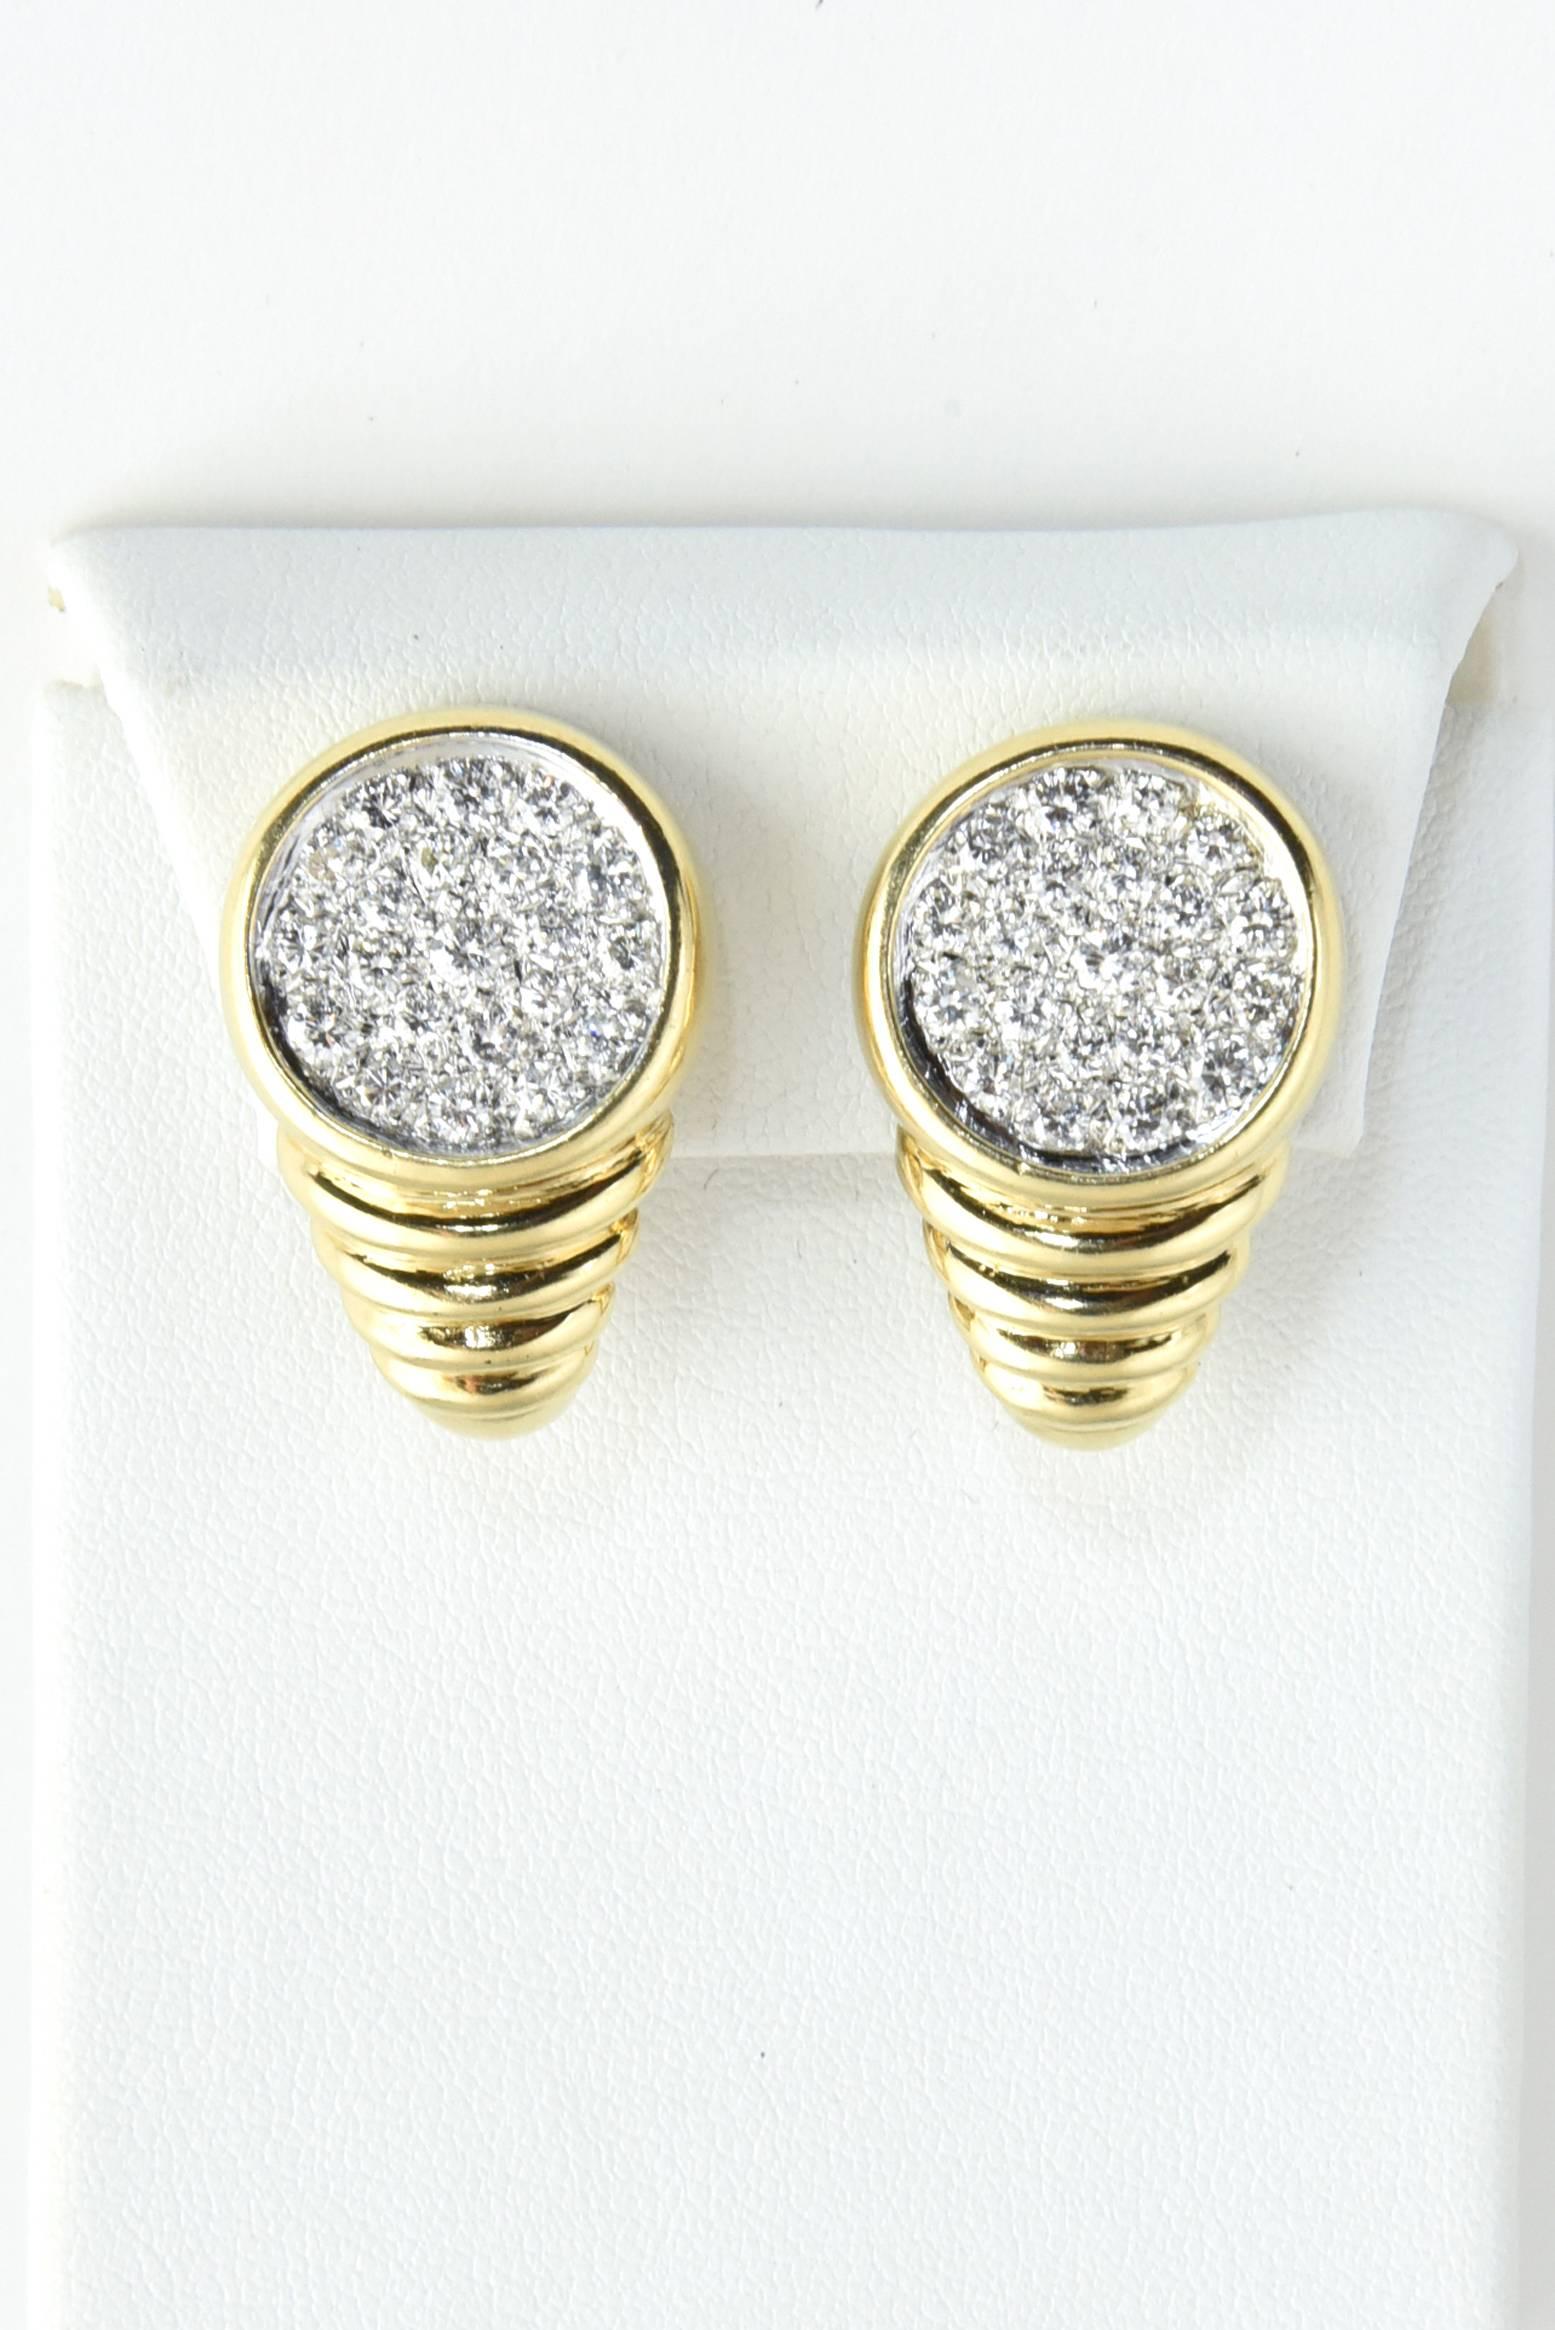 Beautifully made 1970's earrings featuring a 14k white gold circle set with approximately 2 carats of pave diamonds.  The circle is mounted in a 14k yellow gold bezel which sits on a ribbed gold design that gets smaller as it goes down the ear.  